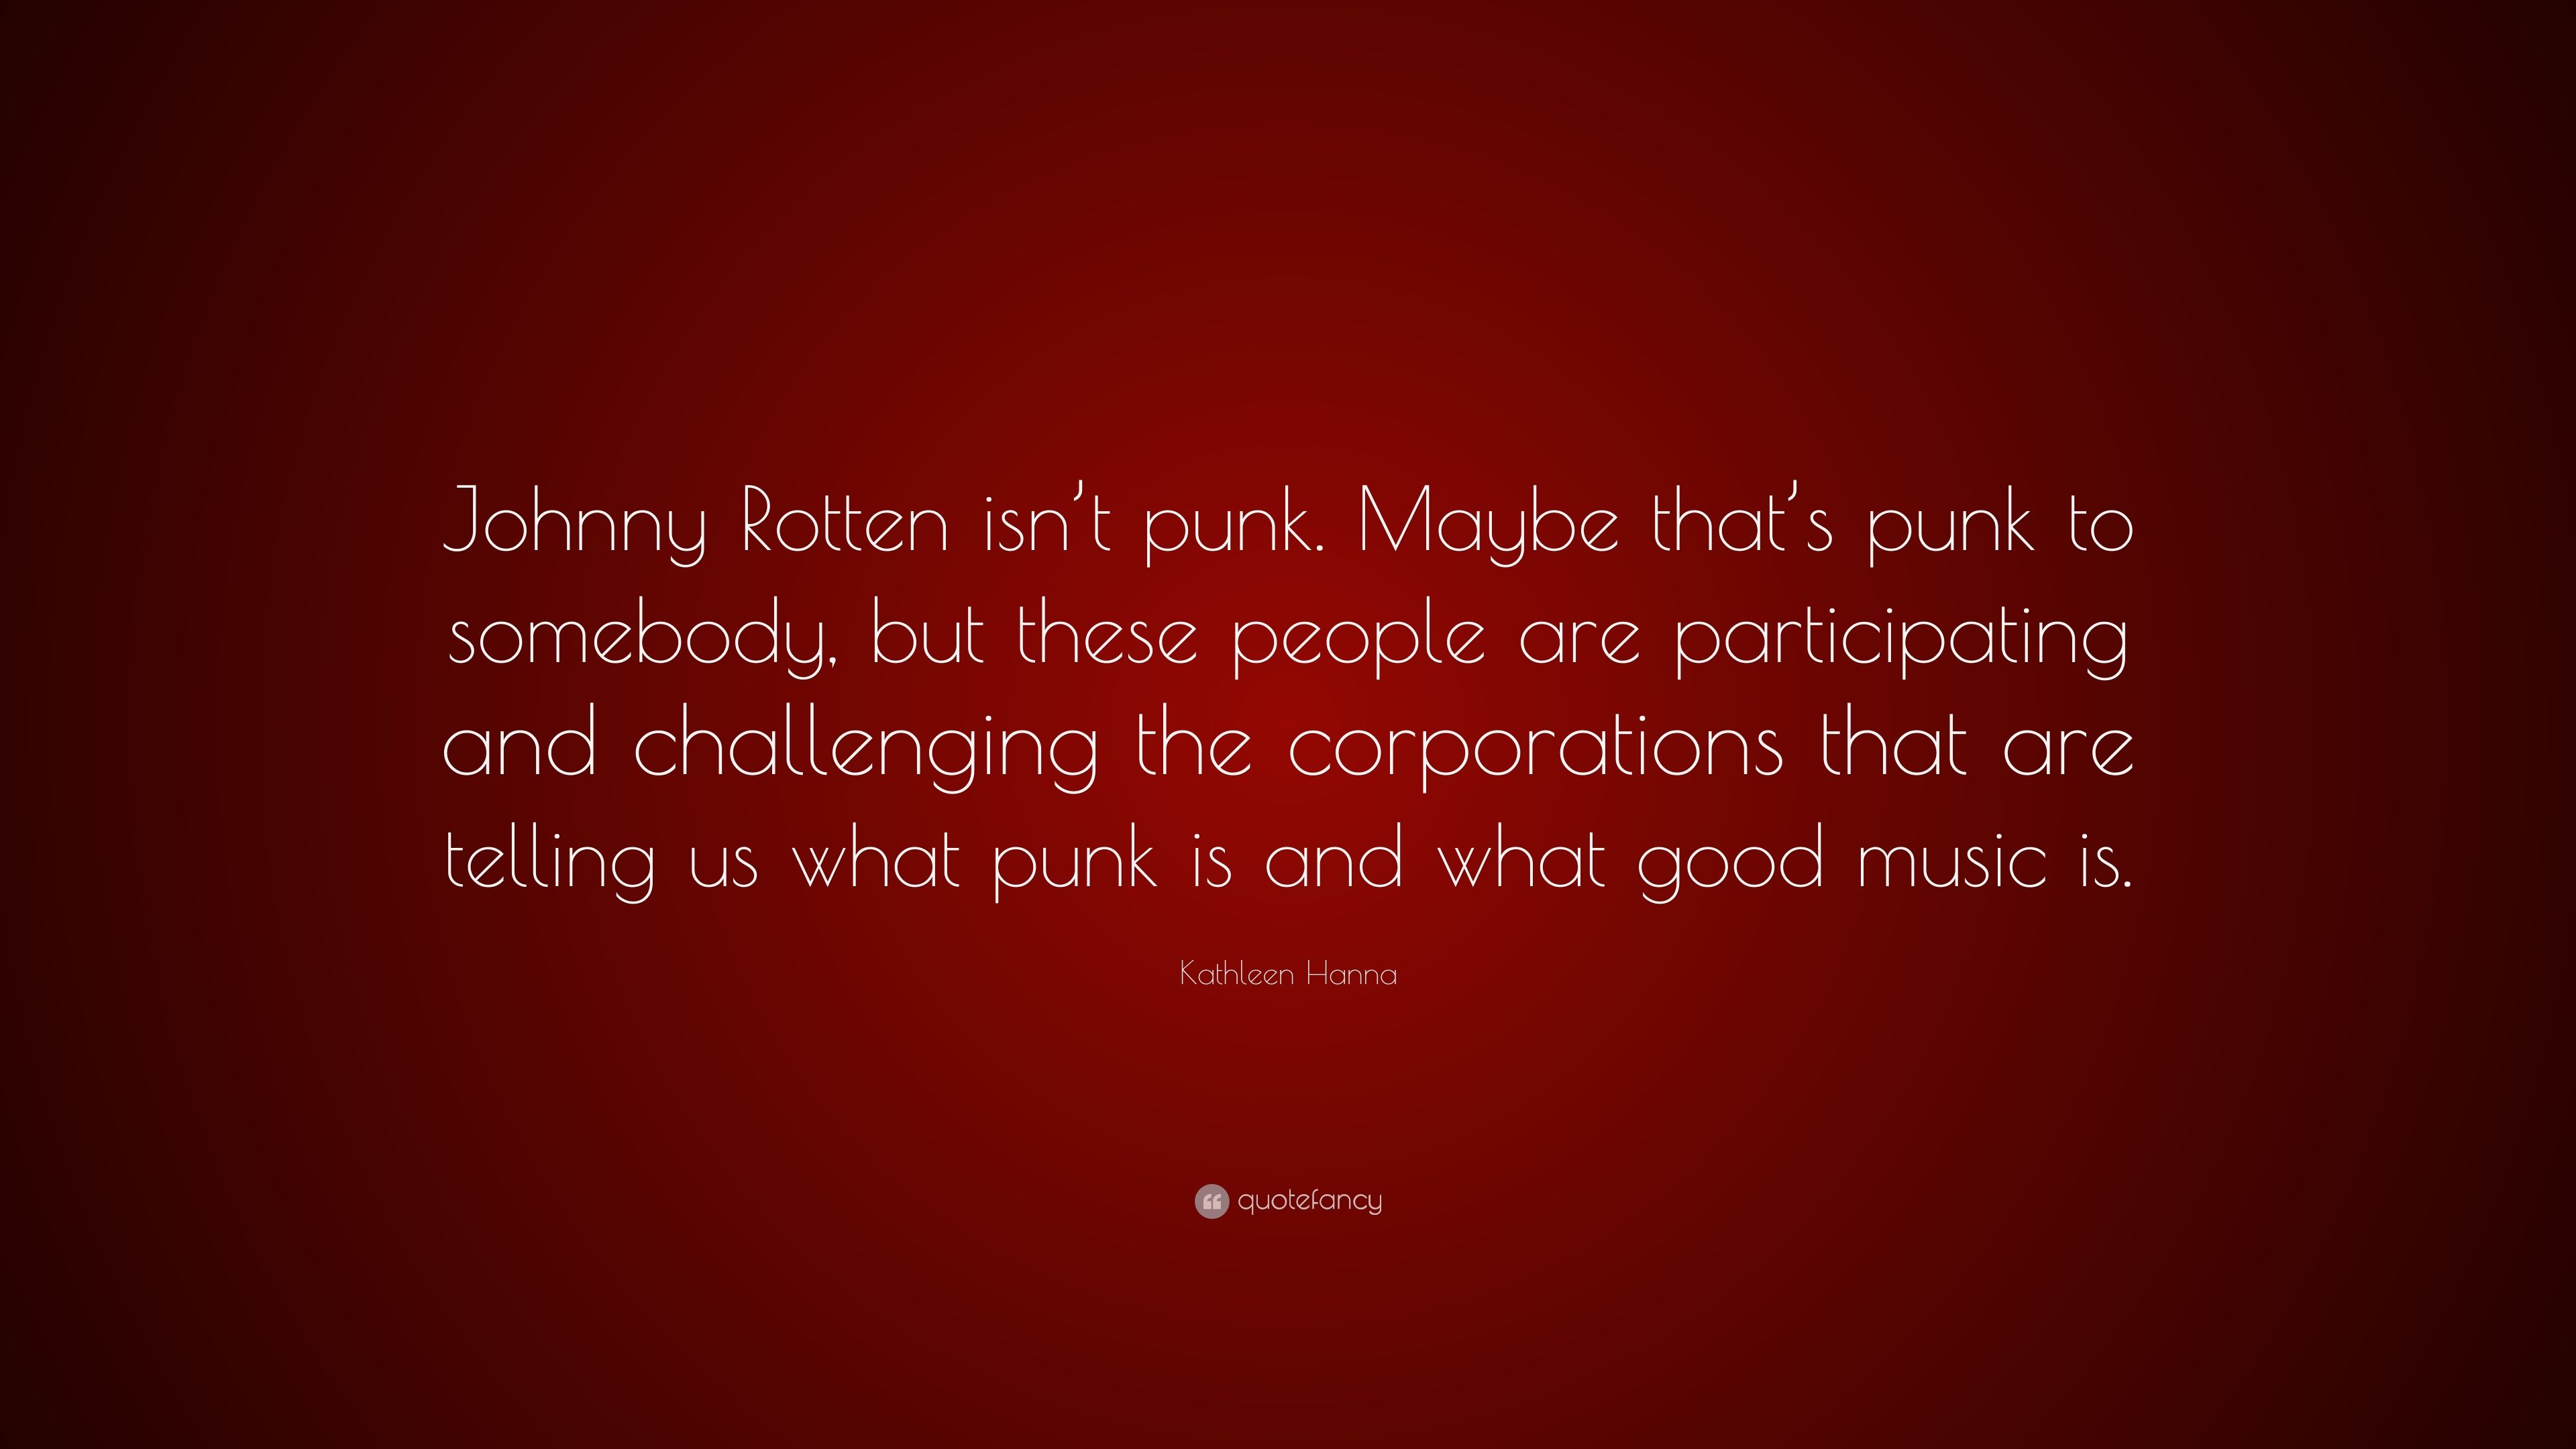 7 Quotes About Johnny Rotten